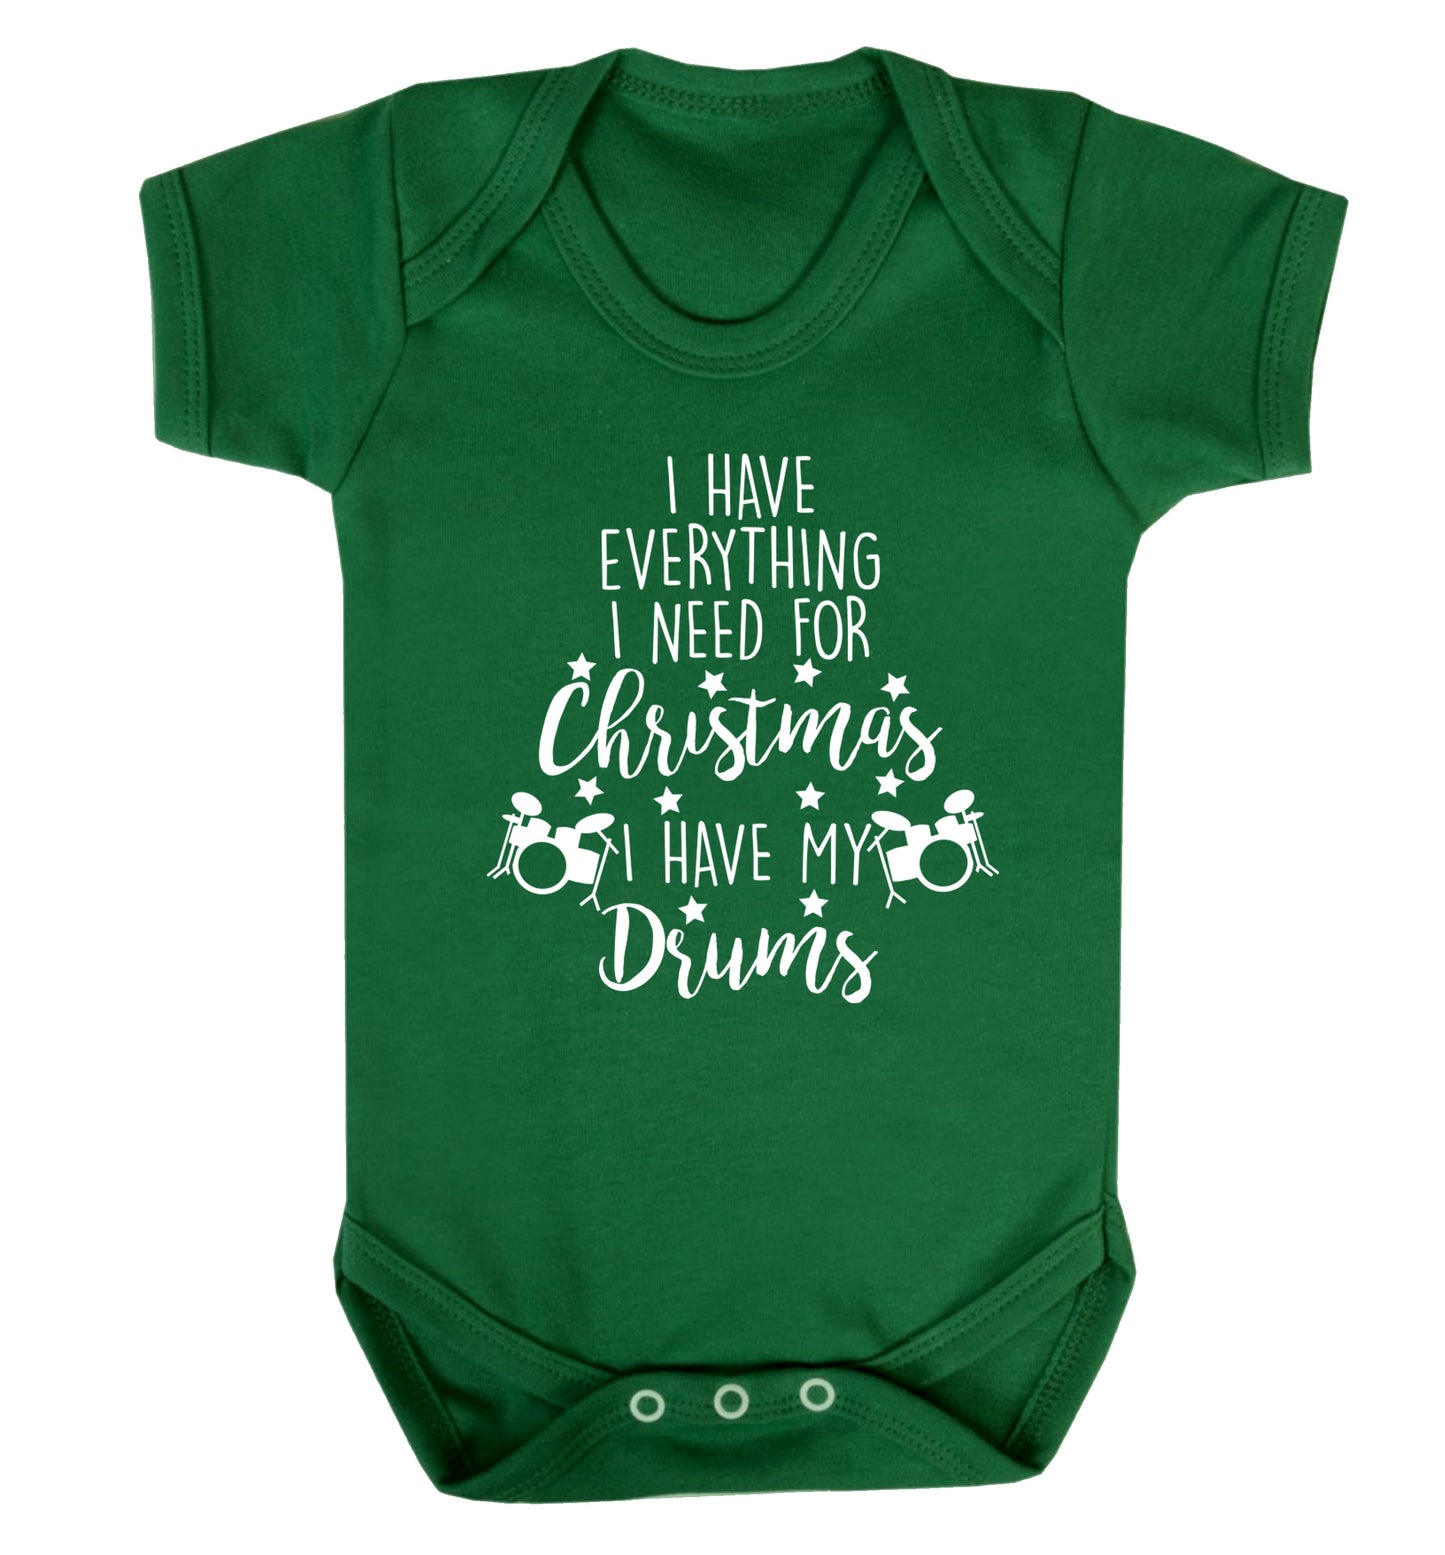 I have everything I need for Christmas I have my drums! Baby Vest green 18-24 months